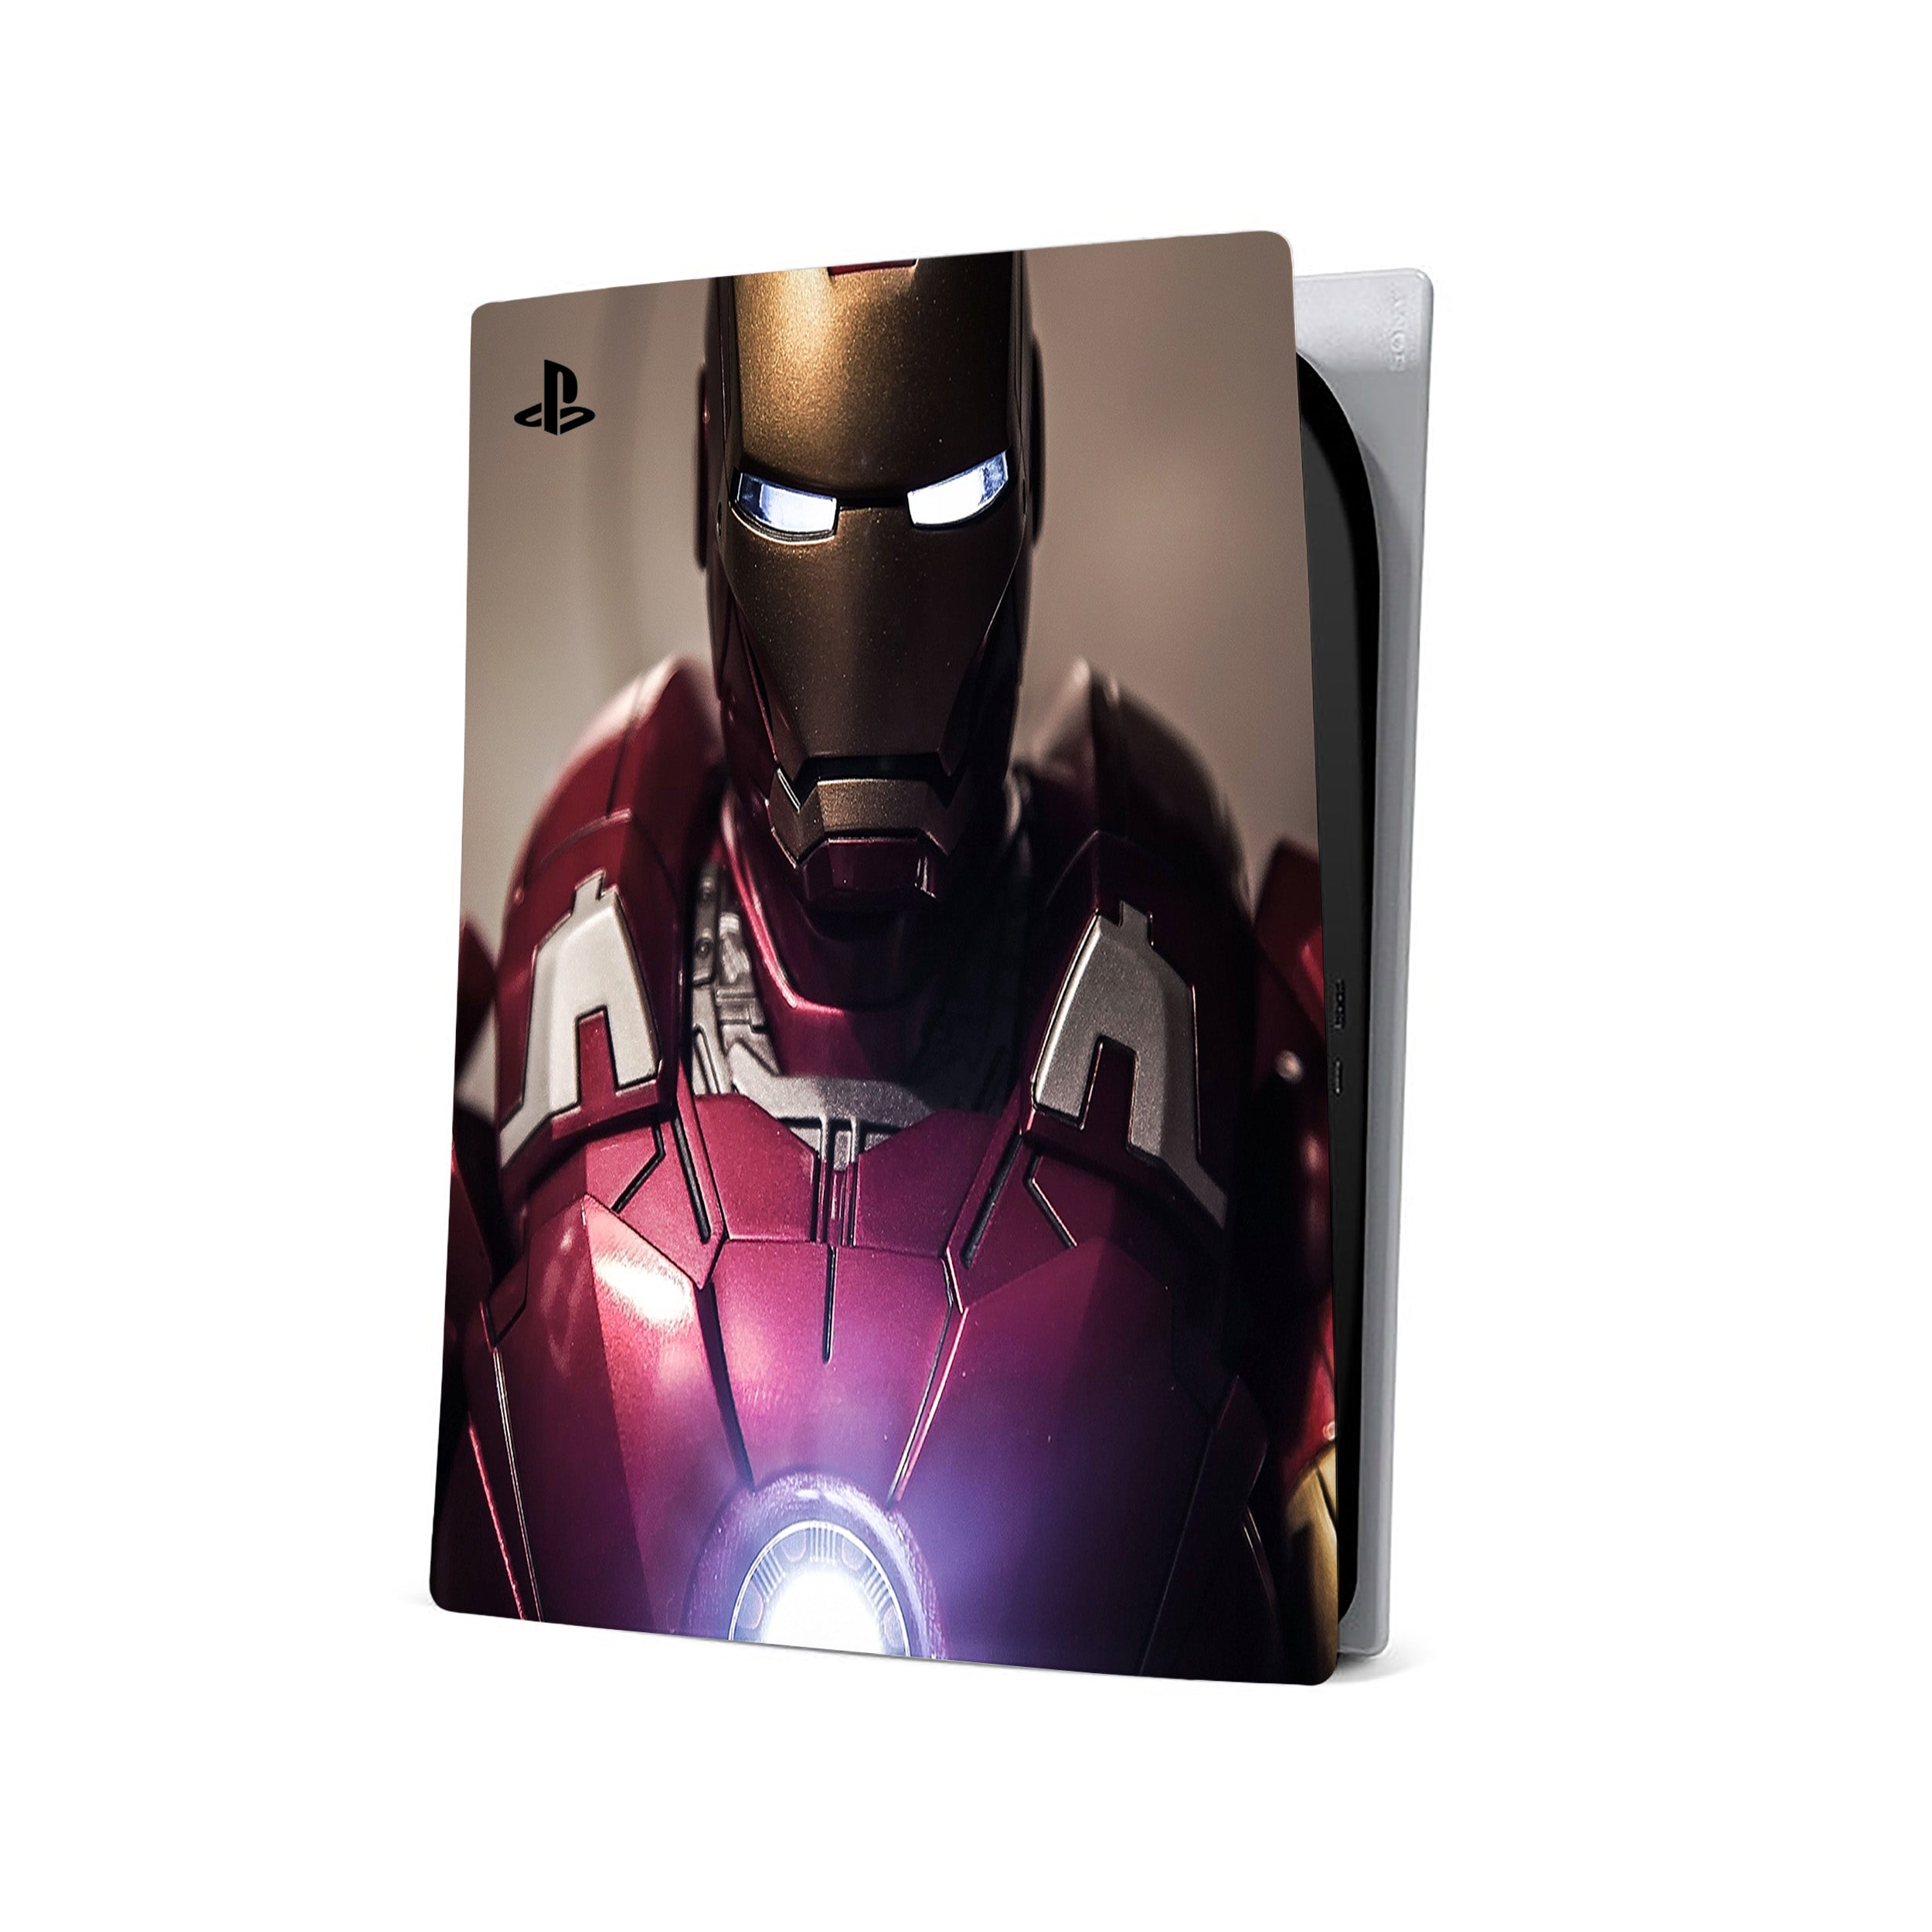 A video game skin featuring a Marvel Iron Man design for the PS5.